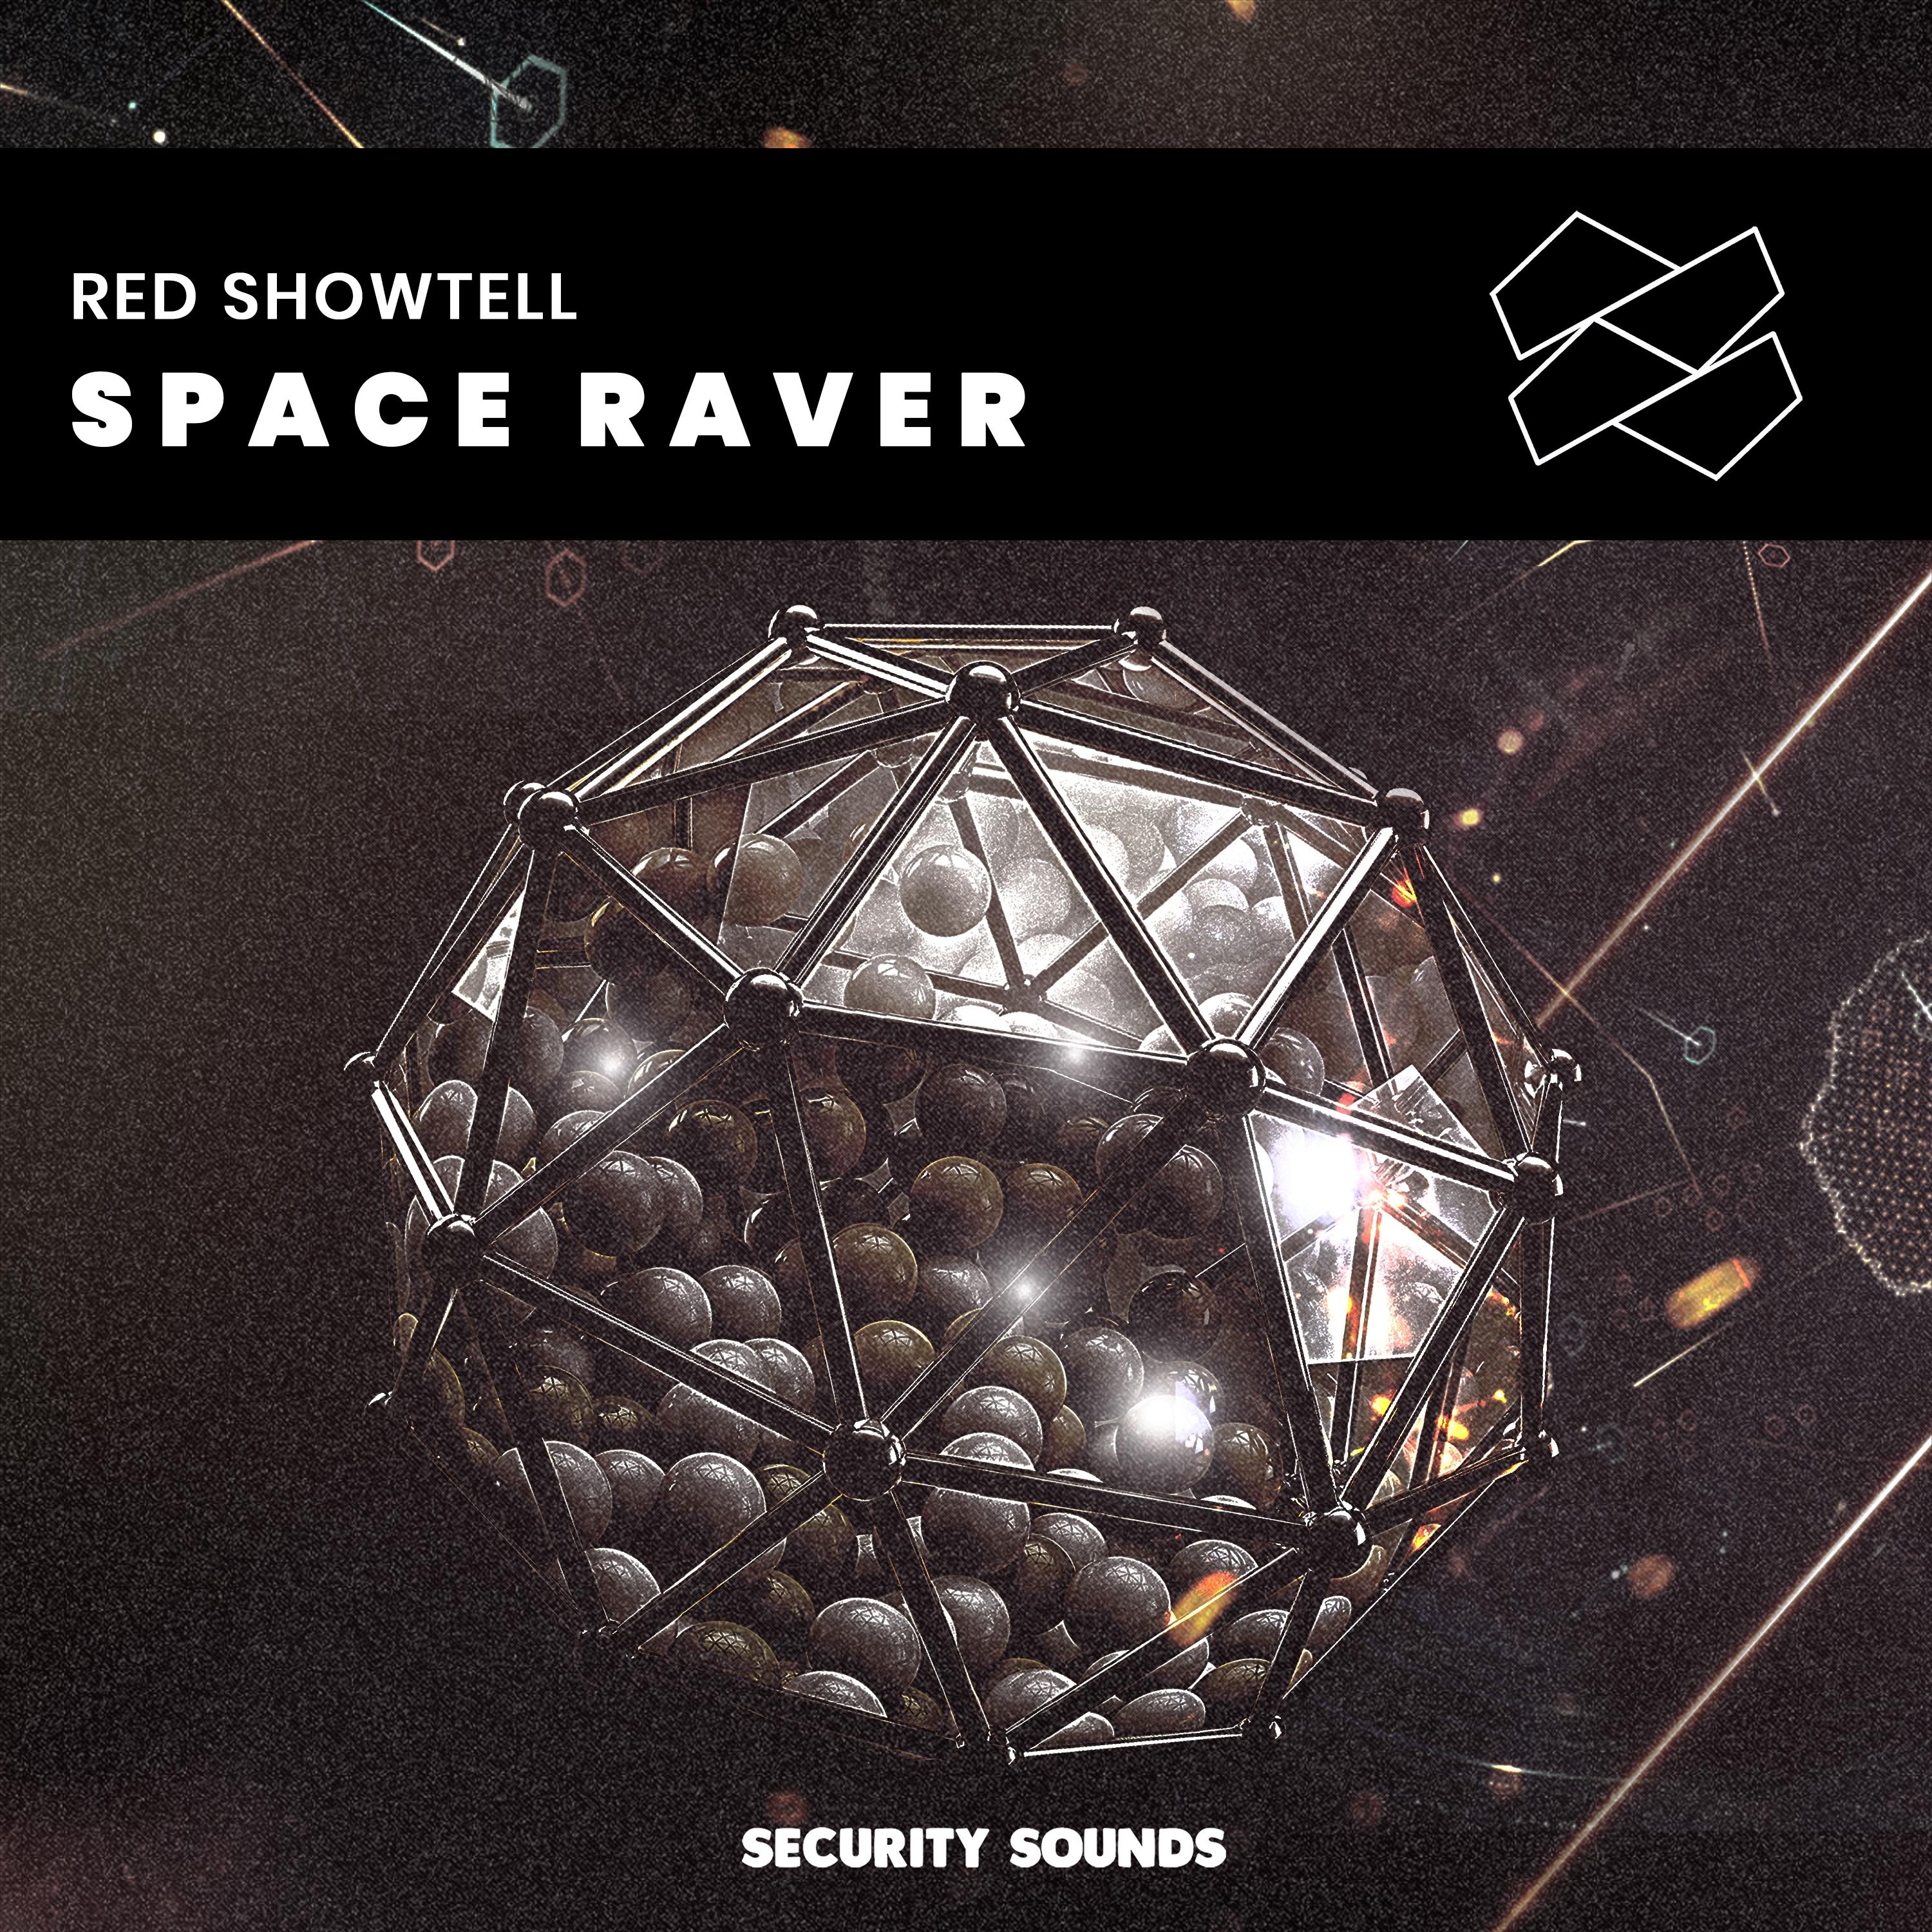 Space Raver歌词 歌手Red Showtell-专辑Space Raver-单曲《Space Raver》LRC歌词下载